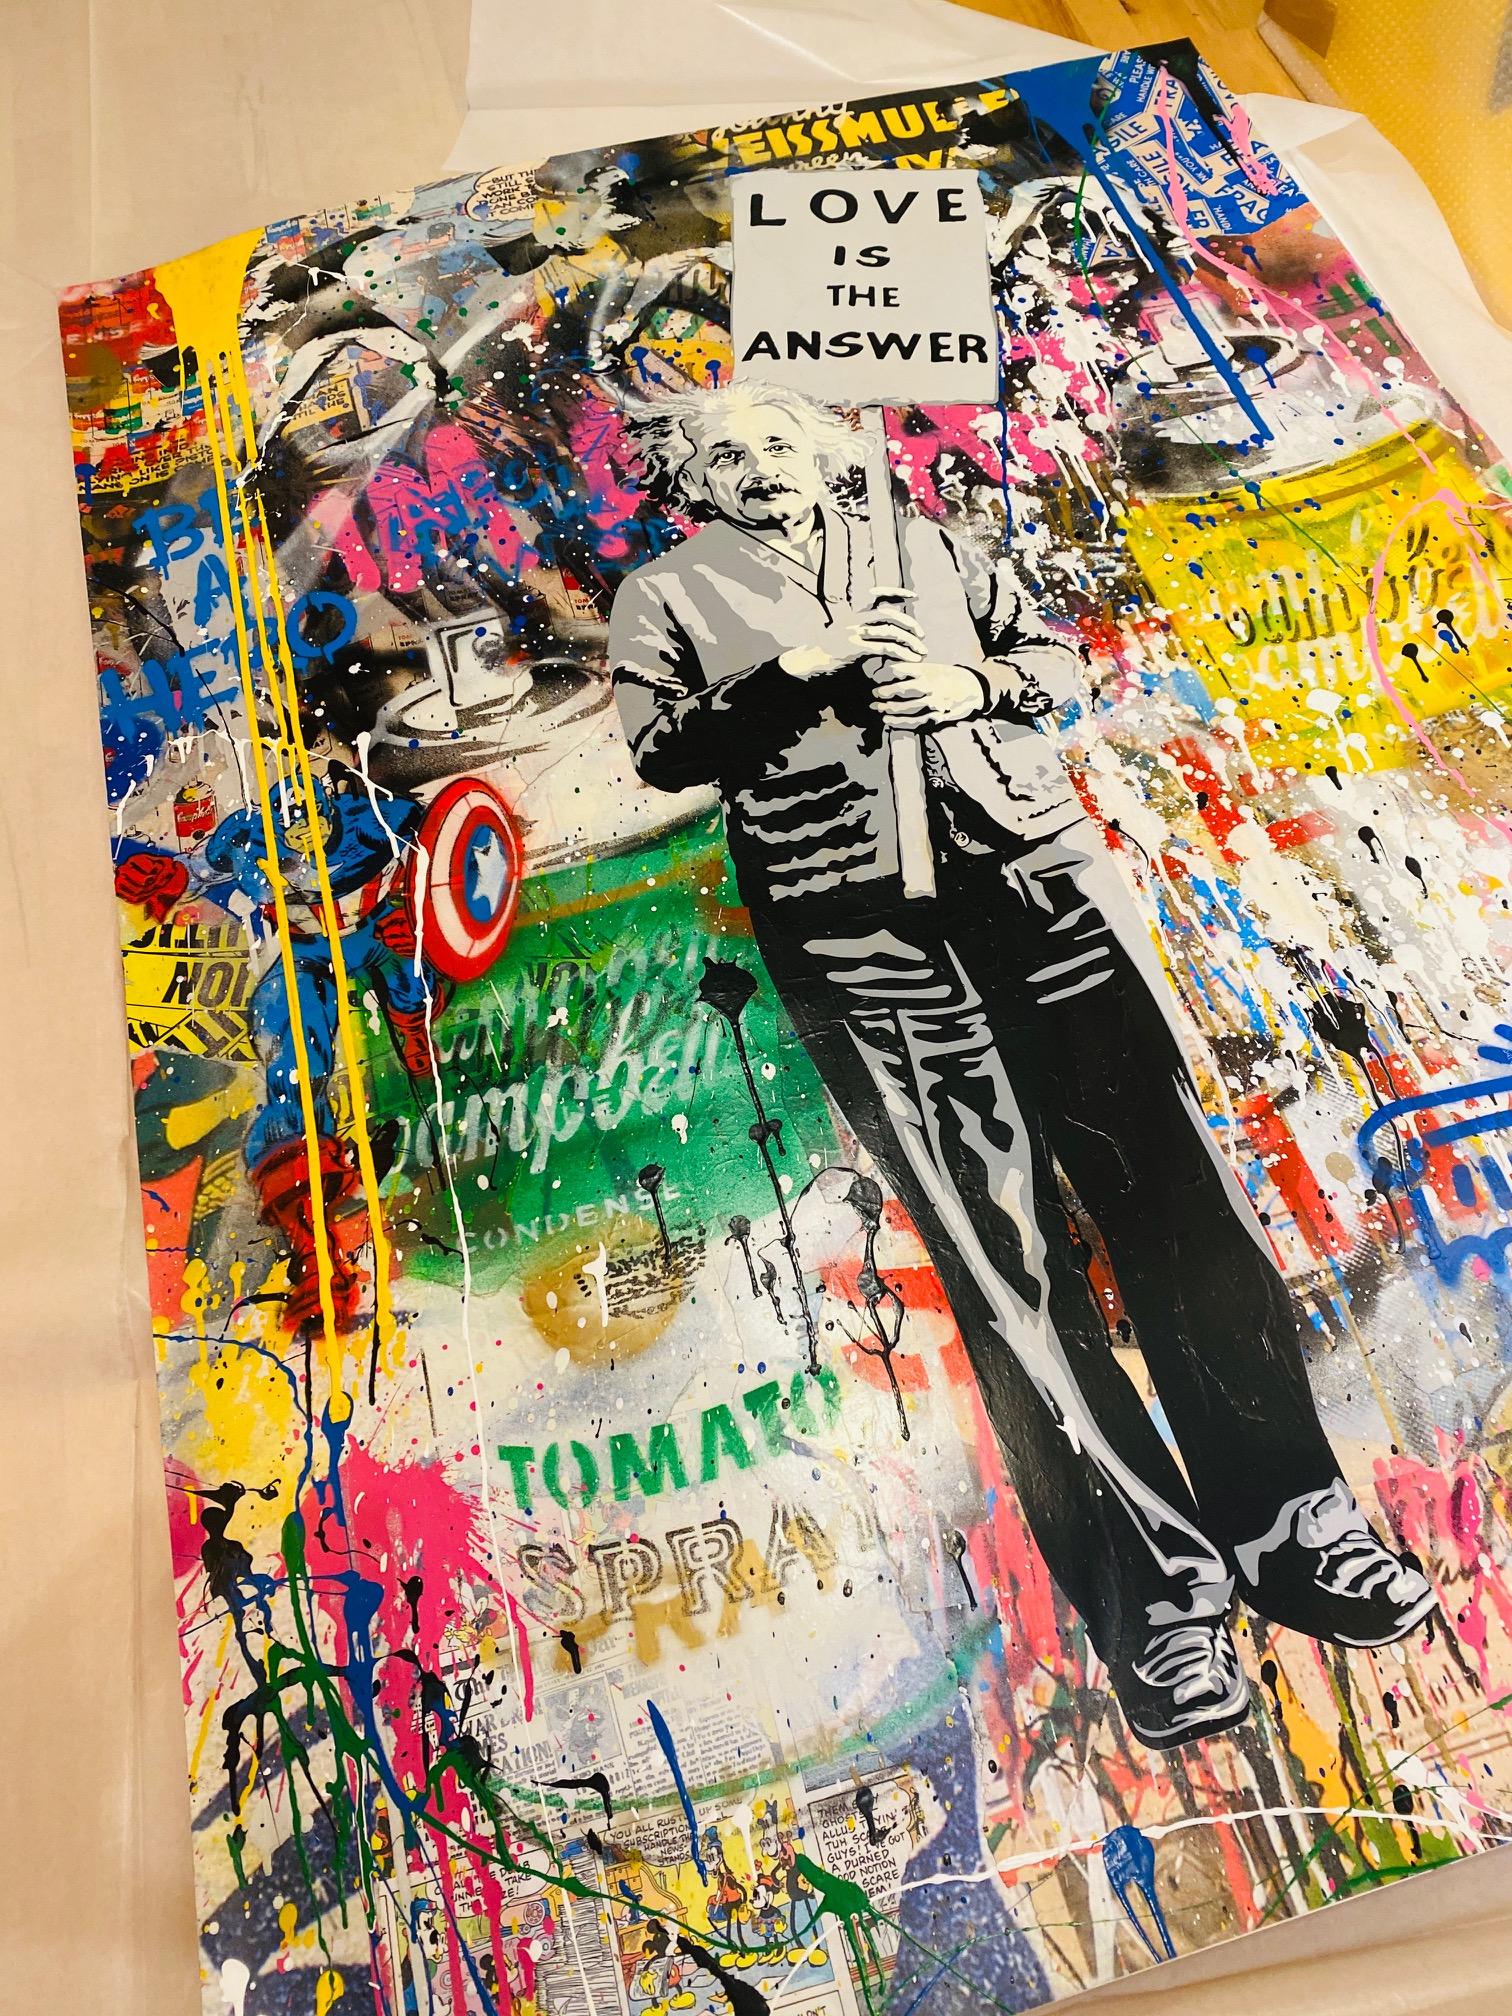 Material: 	Paper 
Method: 	Mixed Media
Other: 	Unique, signed.

Thierry Guetta, now internationally known as Mr. Brainwash, is a French filmmaker and street artist. He began documenting the lives of street artists in 1999 starting with Obey and